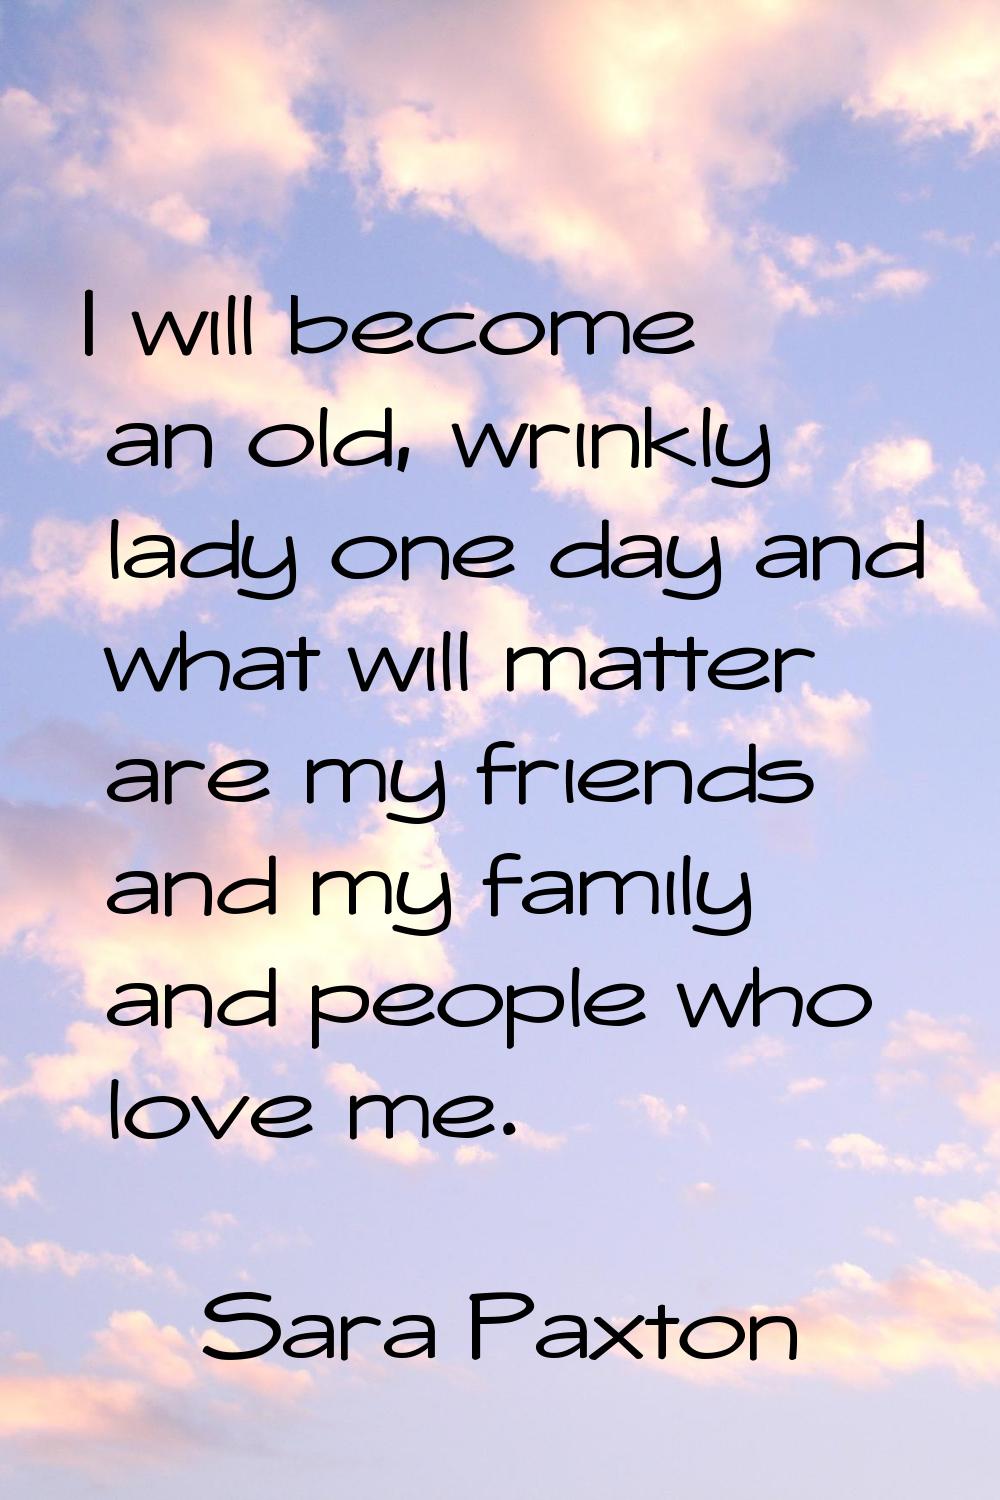 I will become an old, wrinkly lady one day and what will matter are my friends and my family and pe